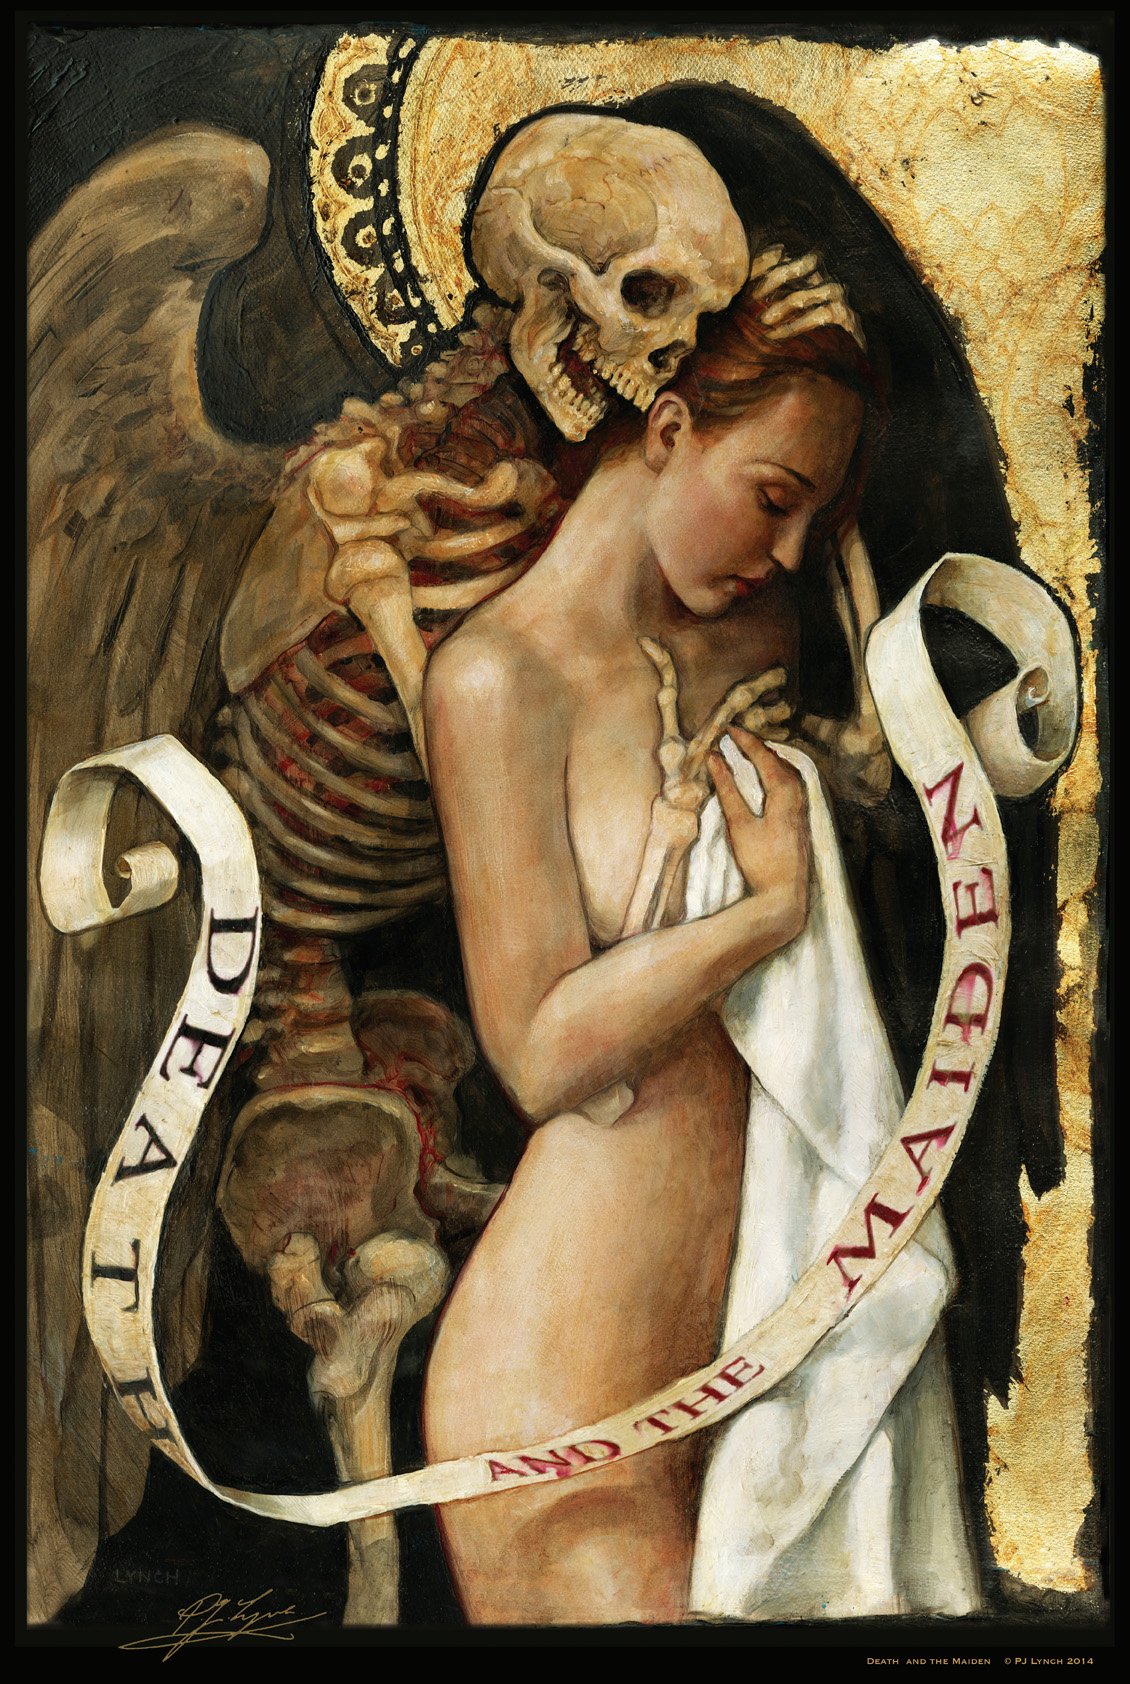 Image of ‘Death and the Maiden’...large poster